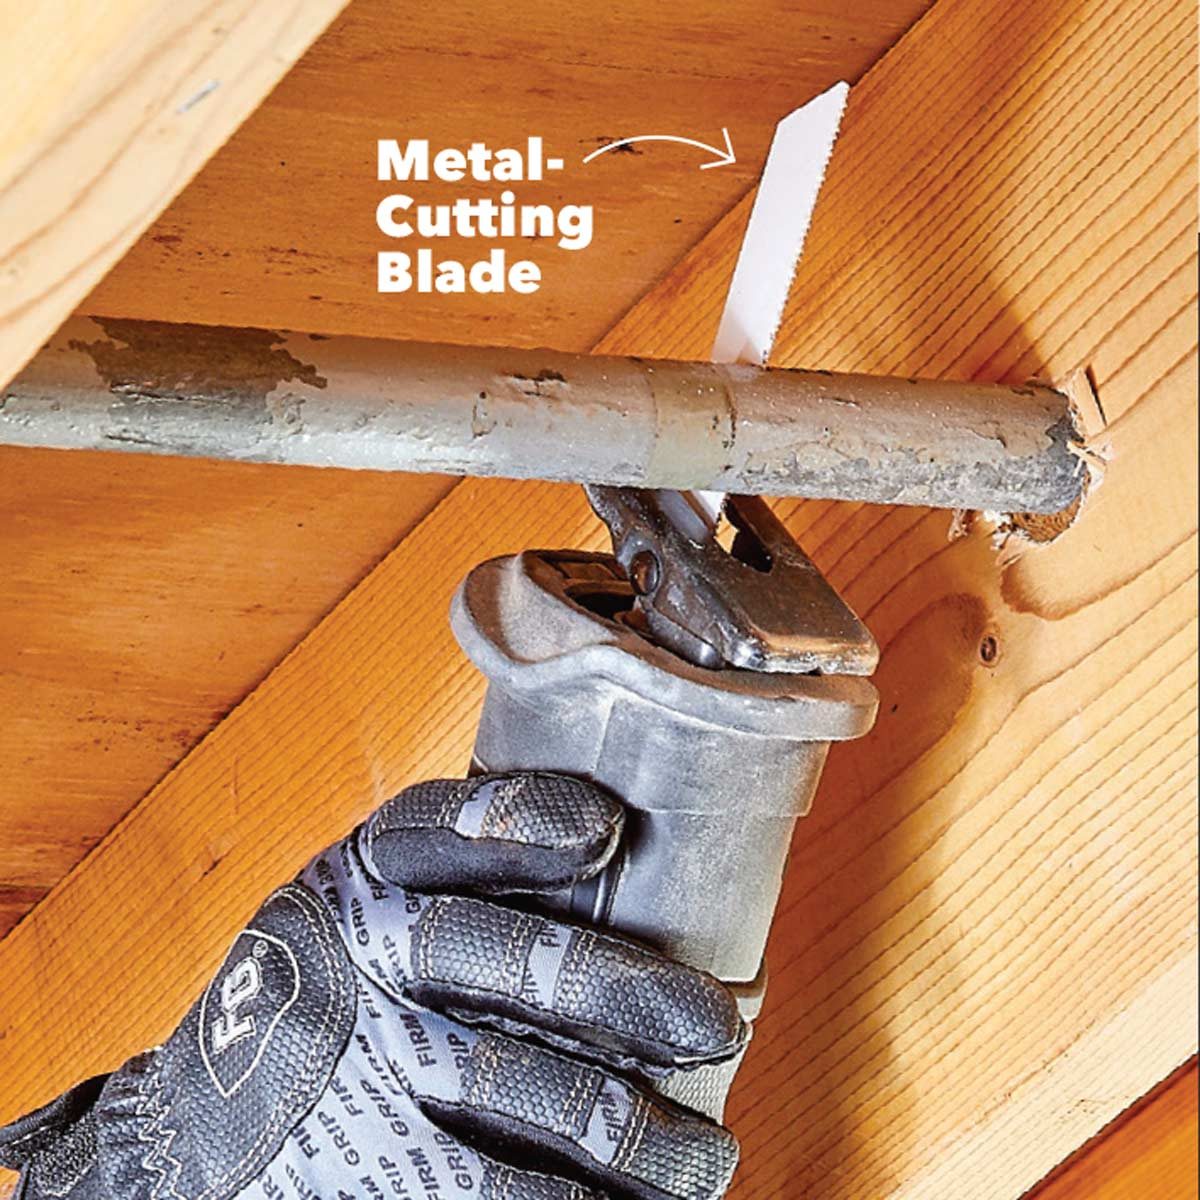 Cut smarter: use a reciprocating saw